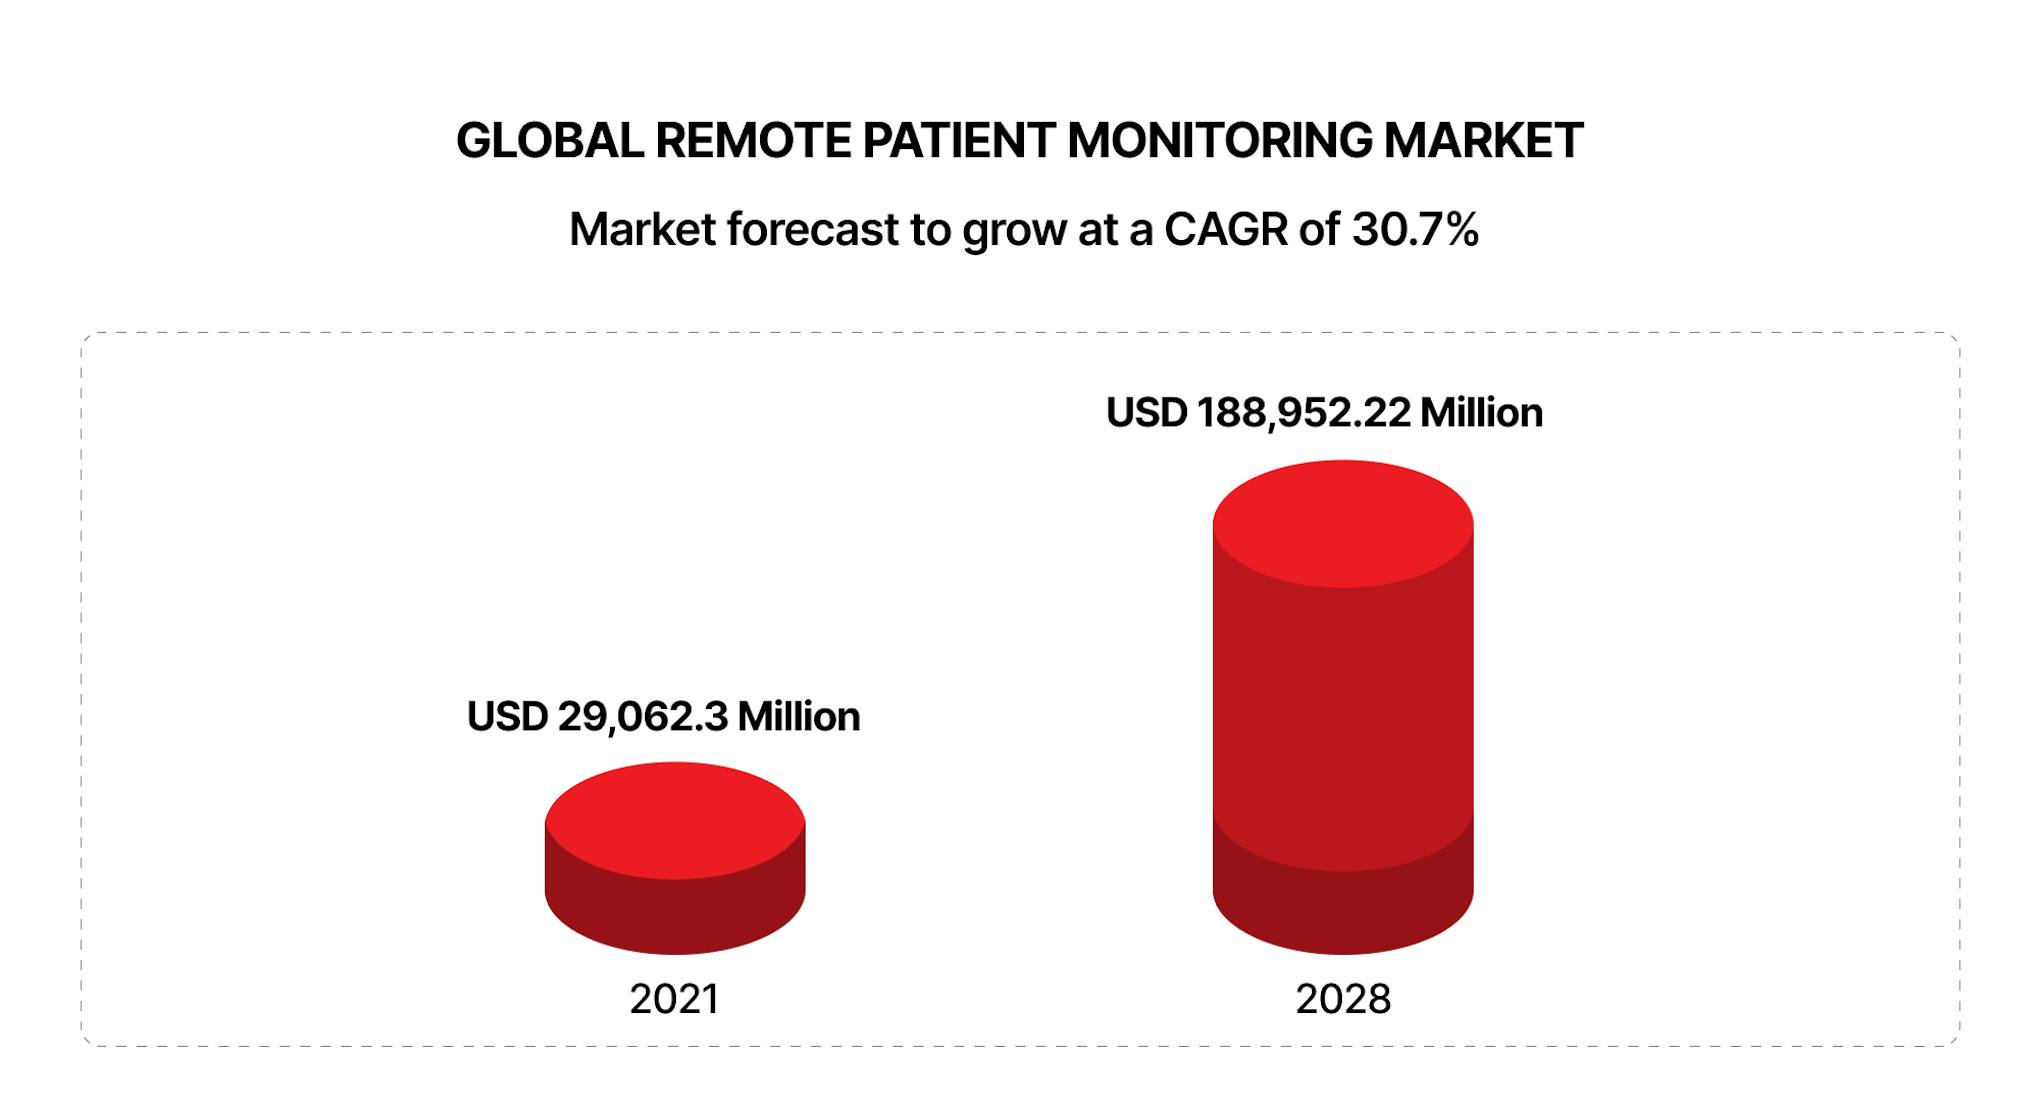 Global Remote Patient Monitoring Market Forecast.